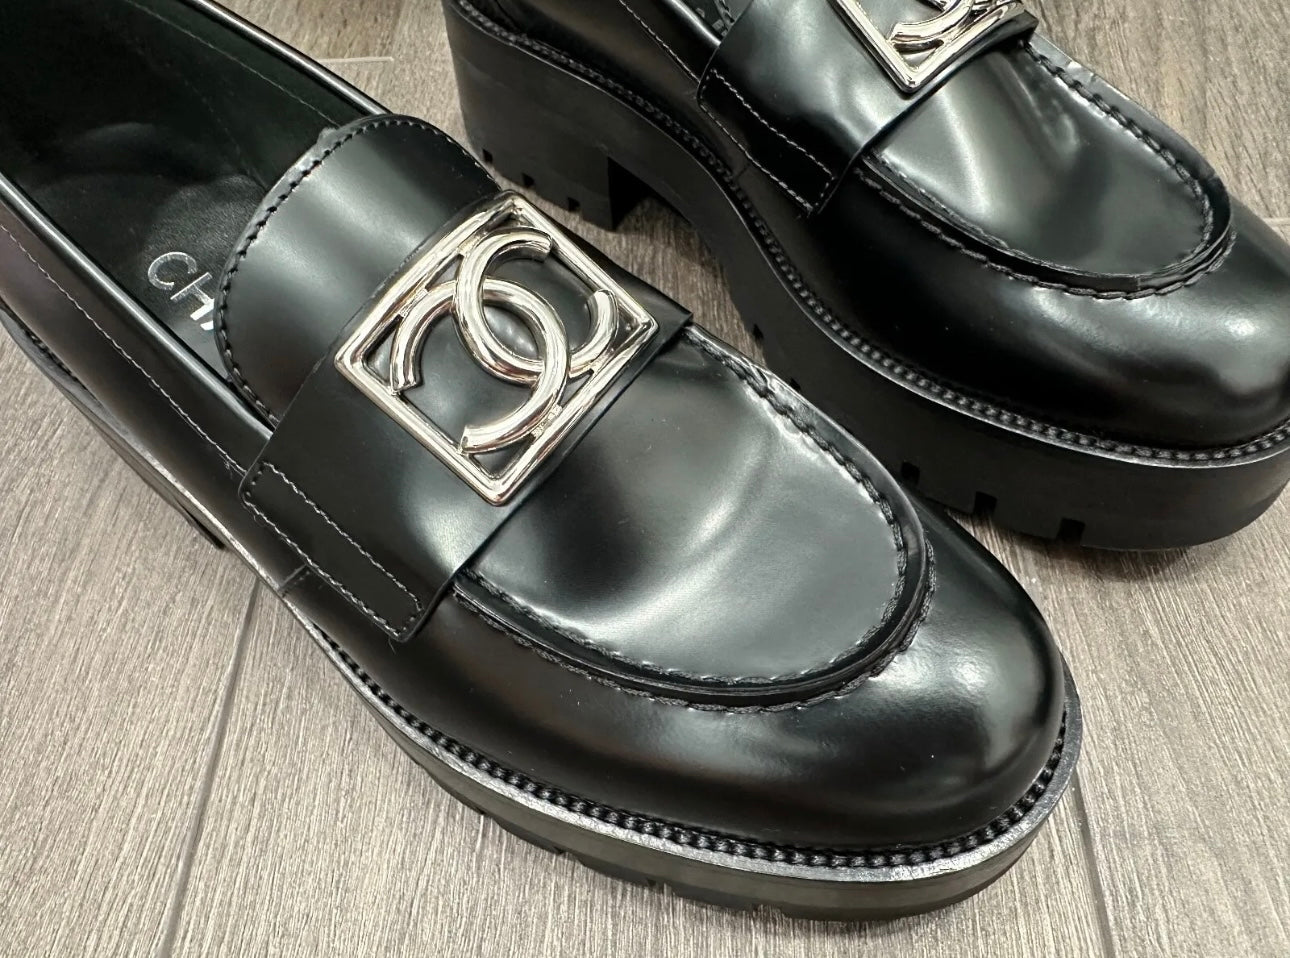 2023 CHANEL BLACK LEATHER METAL CC LOAFERS OXFORD SHOES MOCCASINS